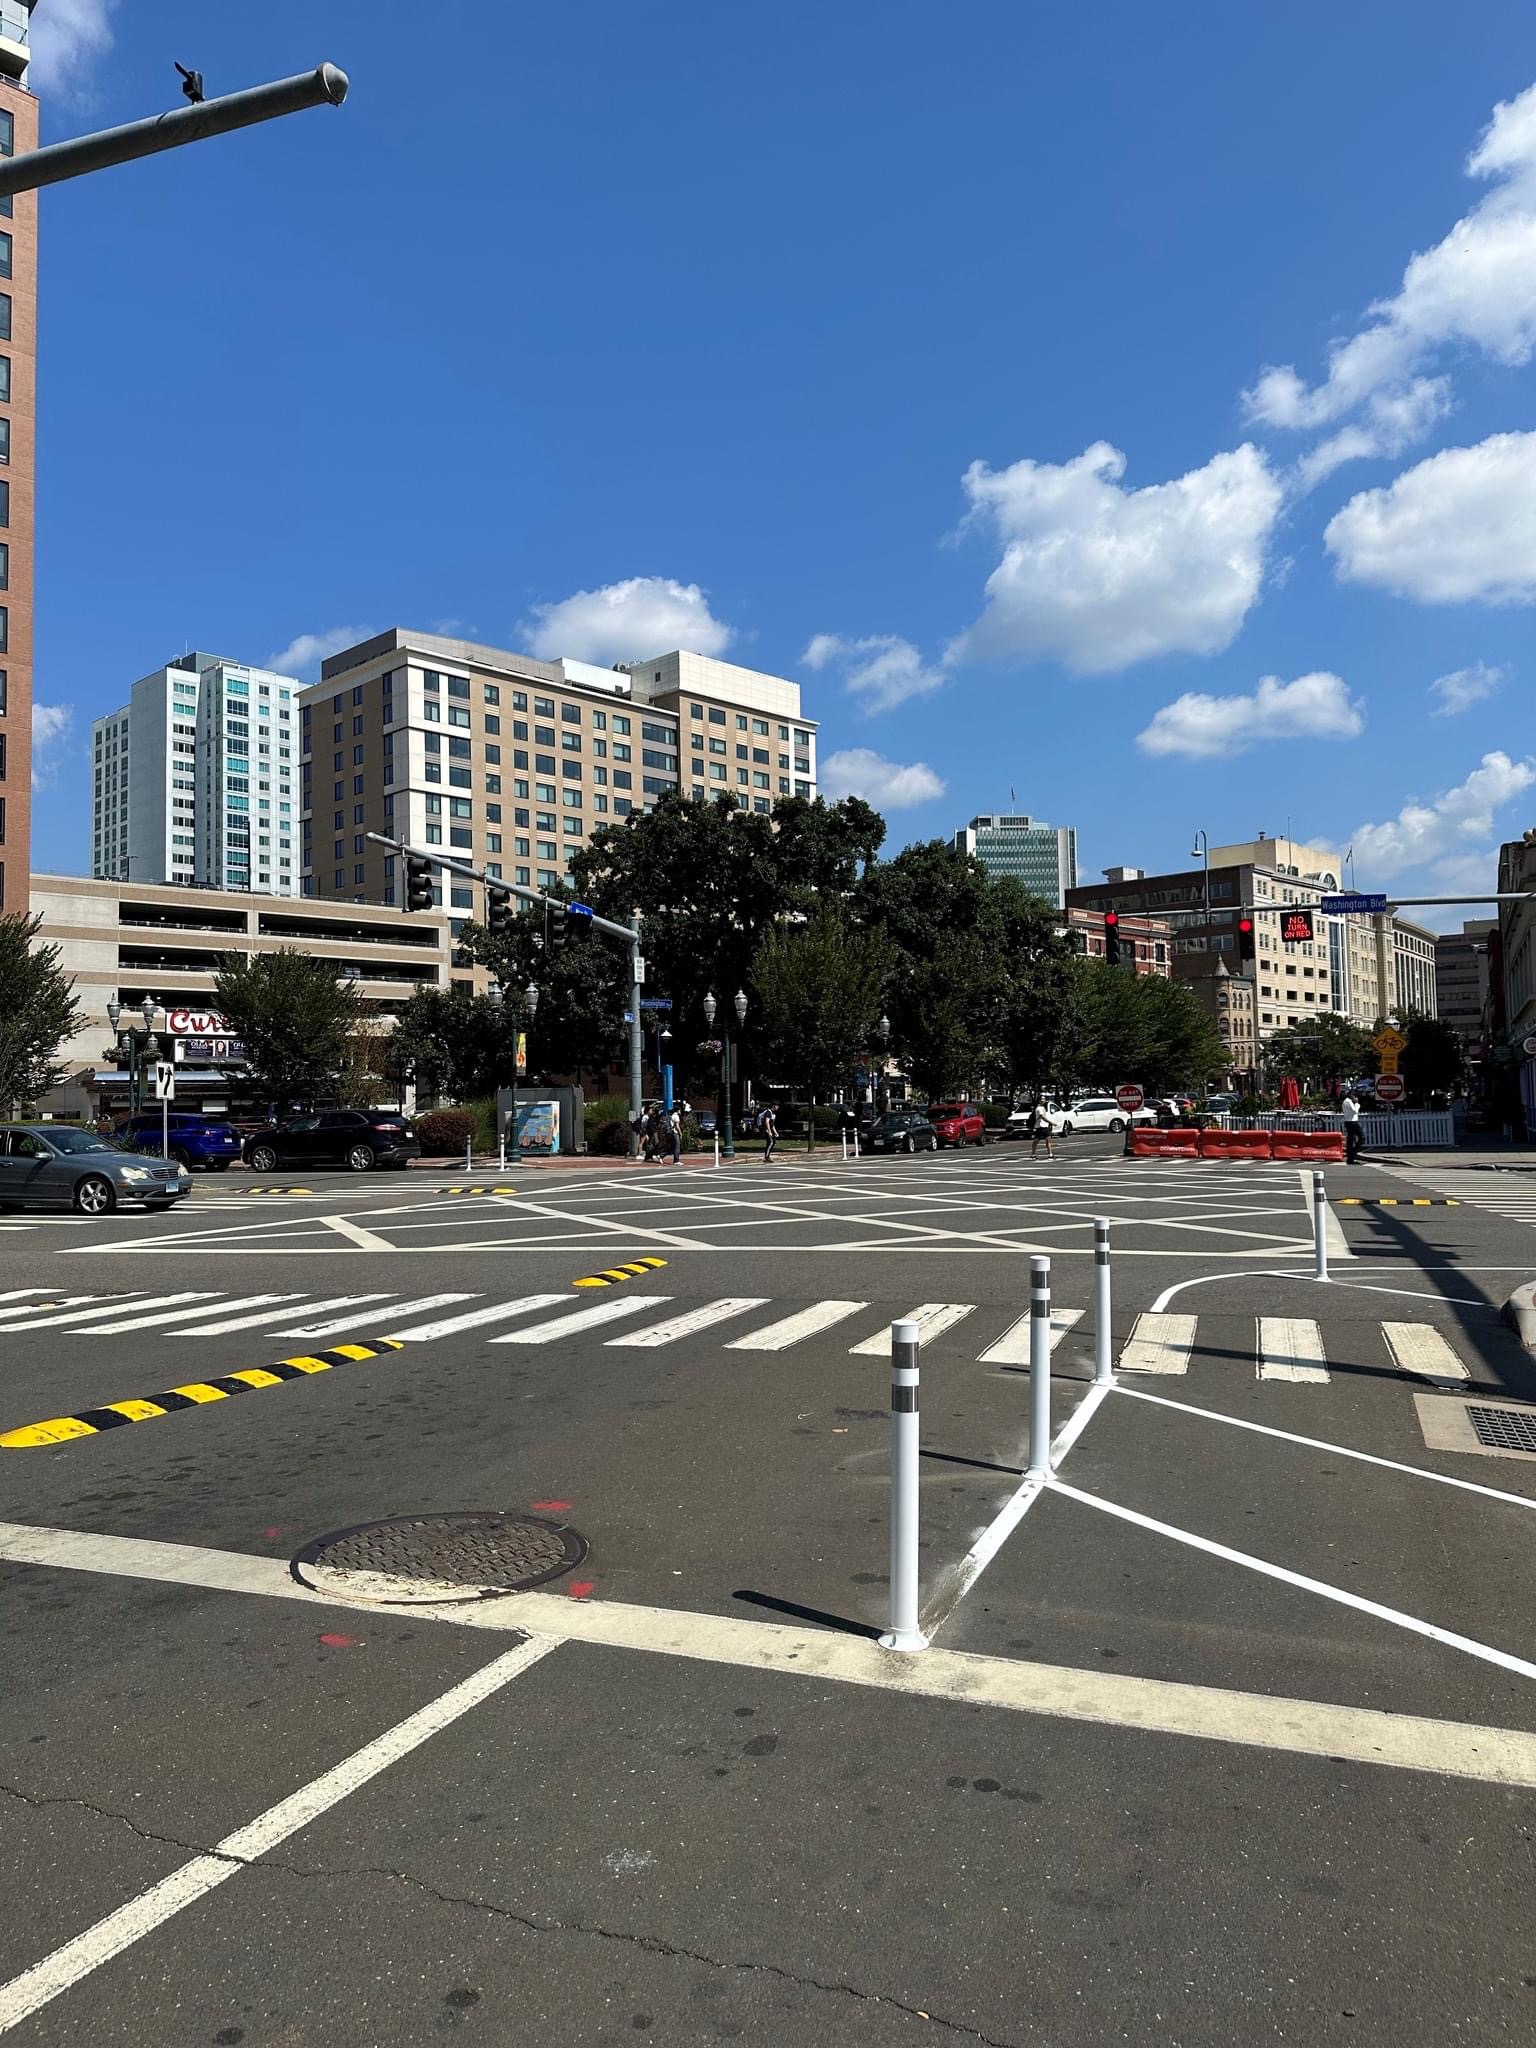 The City's Pilot Project for Pedestrian Safety